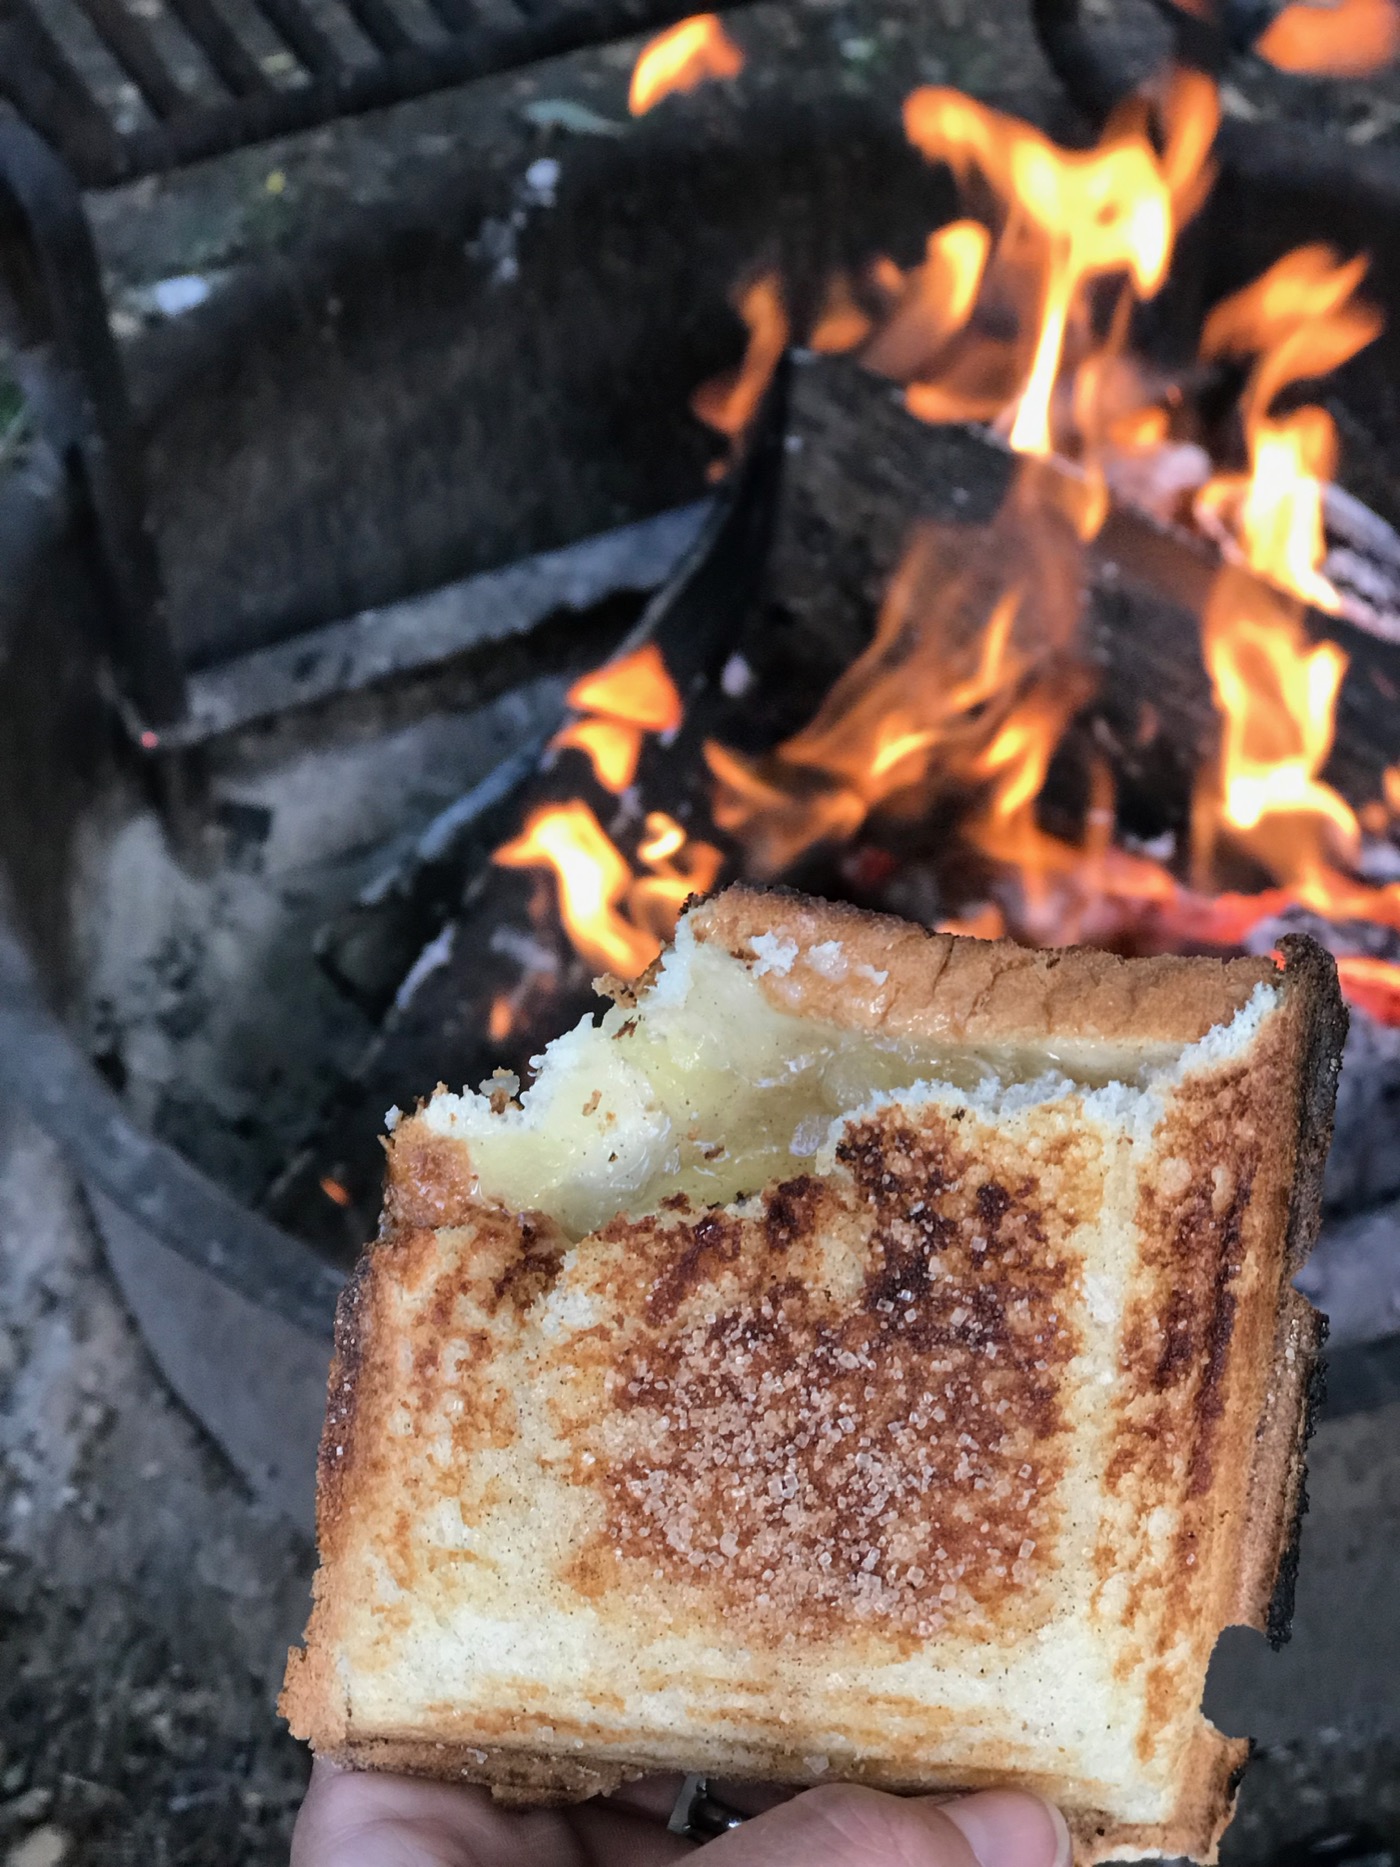 Pie Iron Sandwich - Great While Camping! 